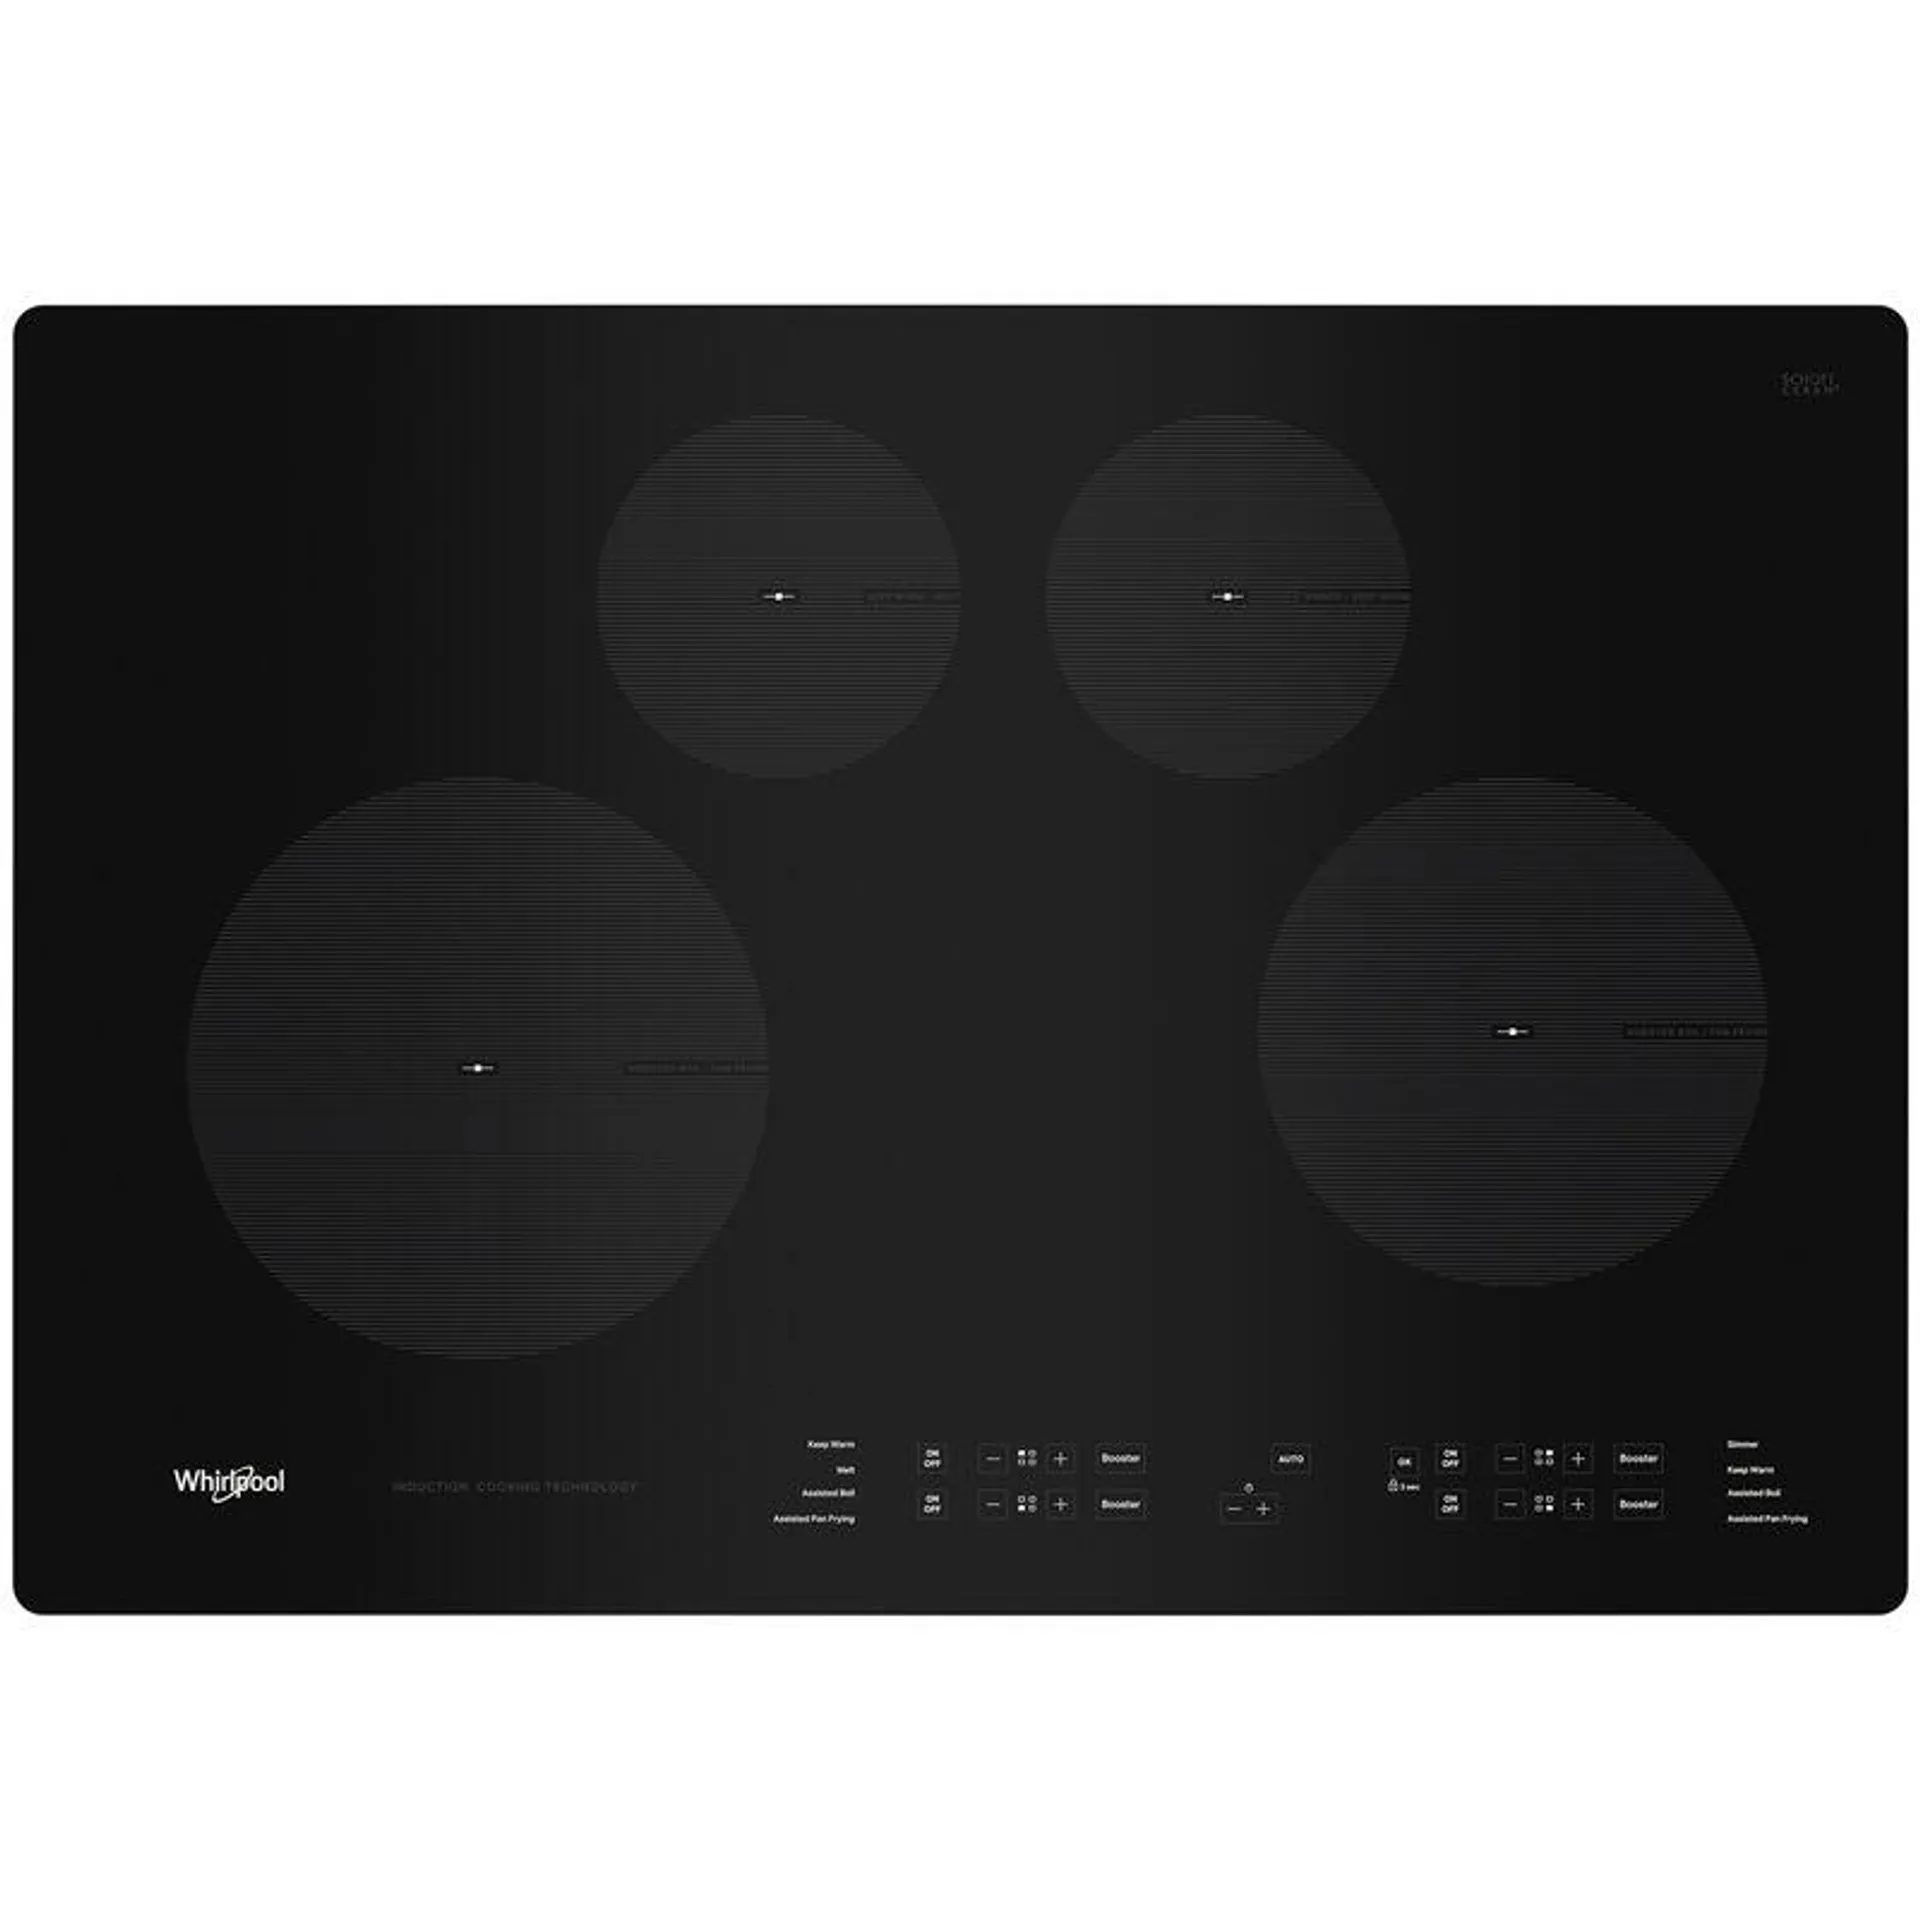 Whirlpool 30 in. Induction Cooktop with 4 Smoothtop Burners - Black